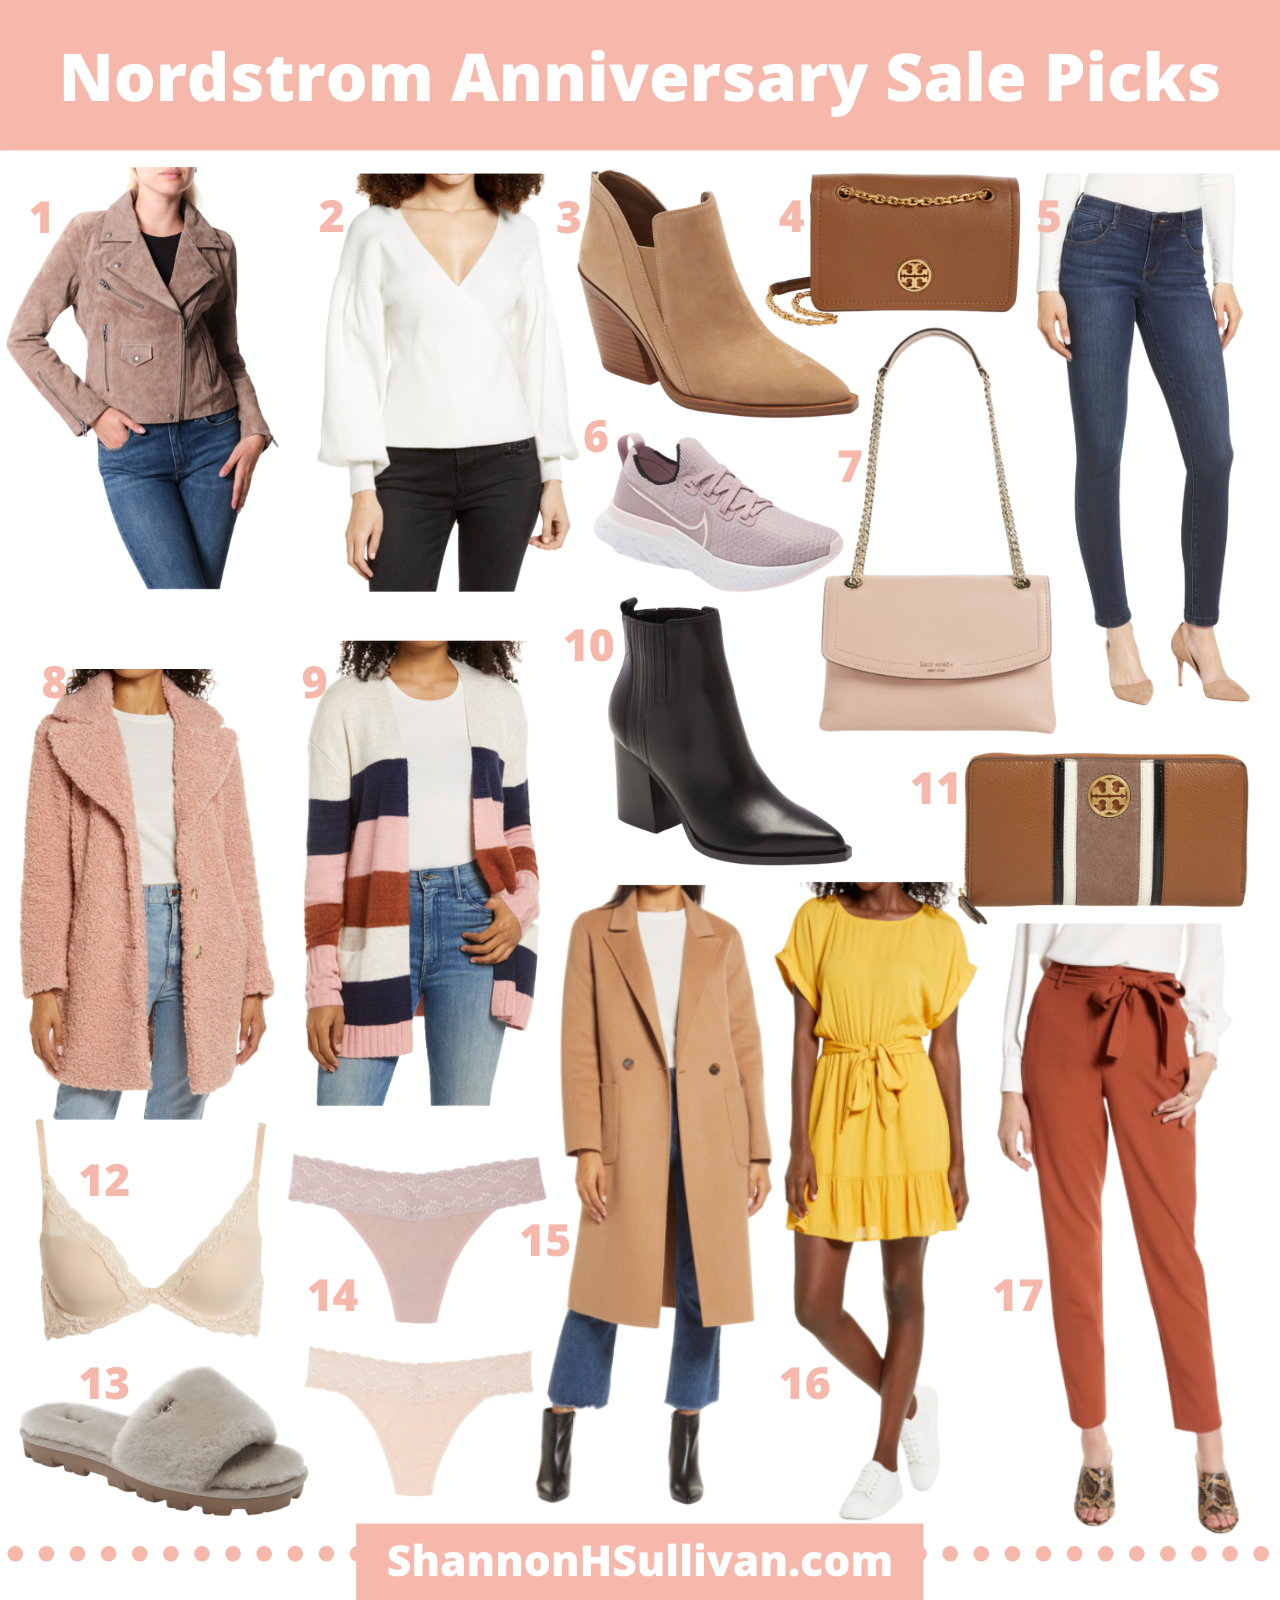 Nordstrom anniversary sale 2020 shopping guide